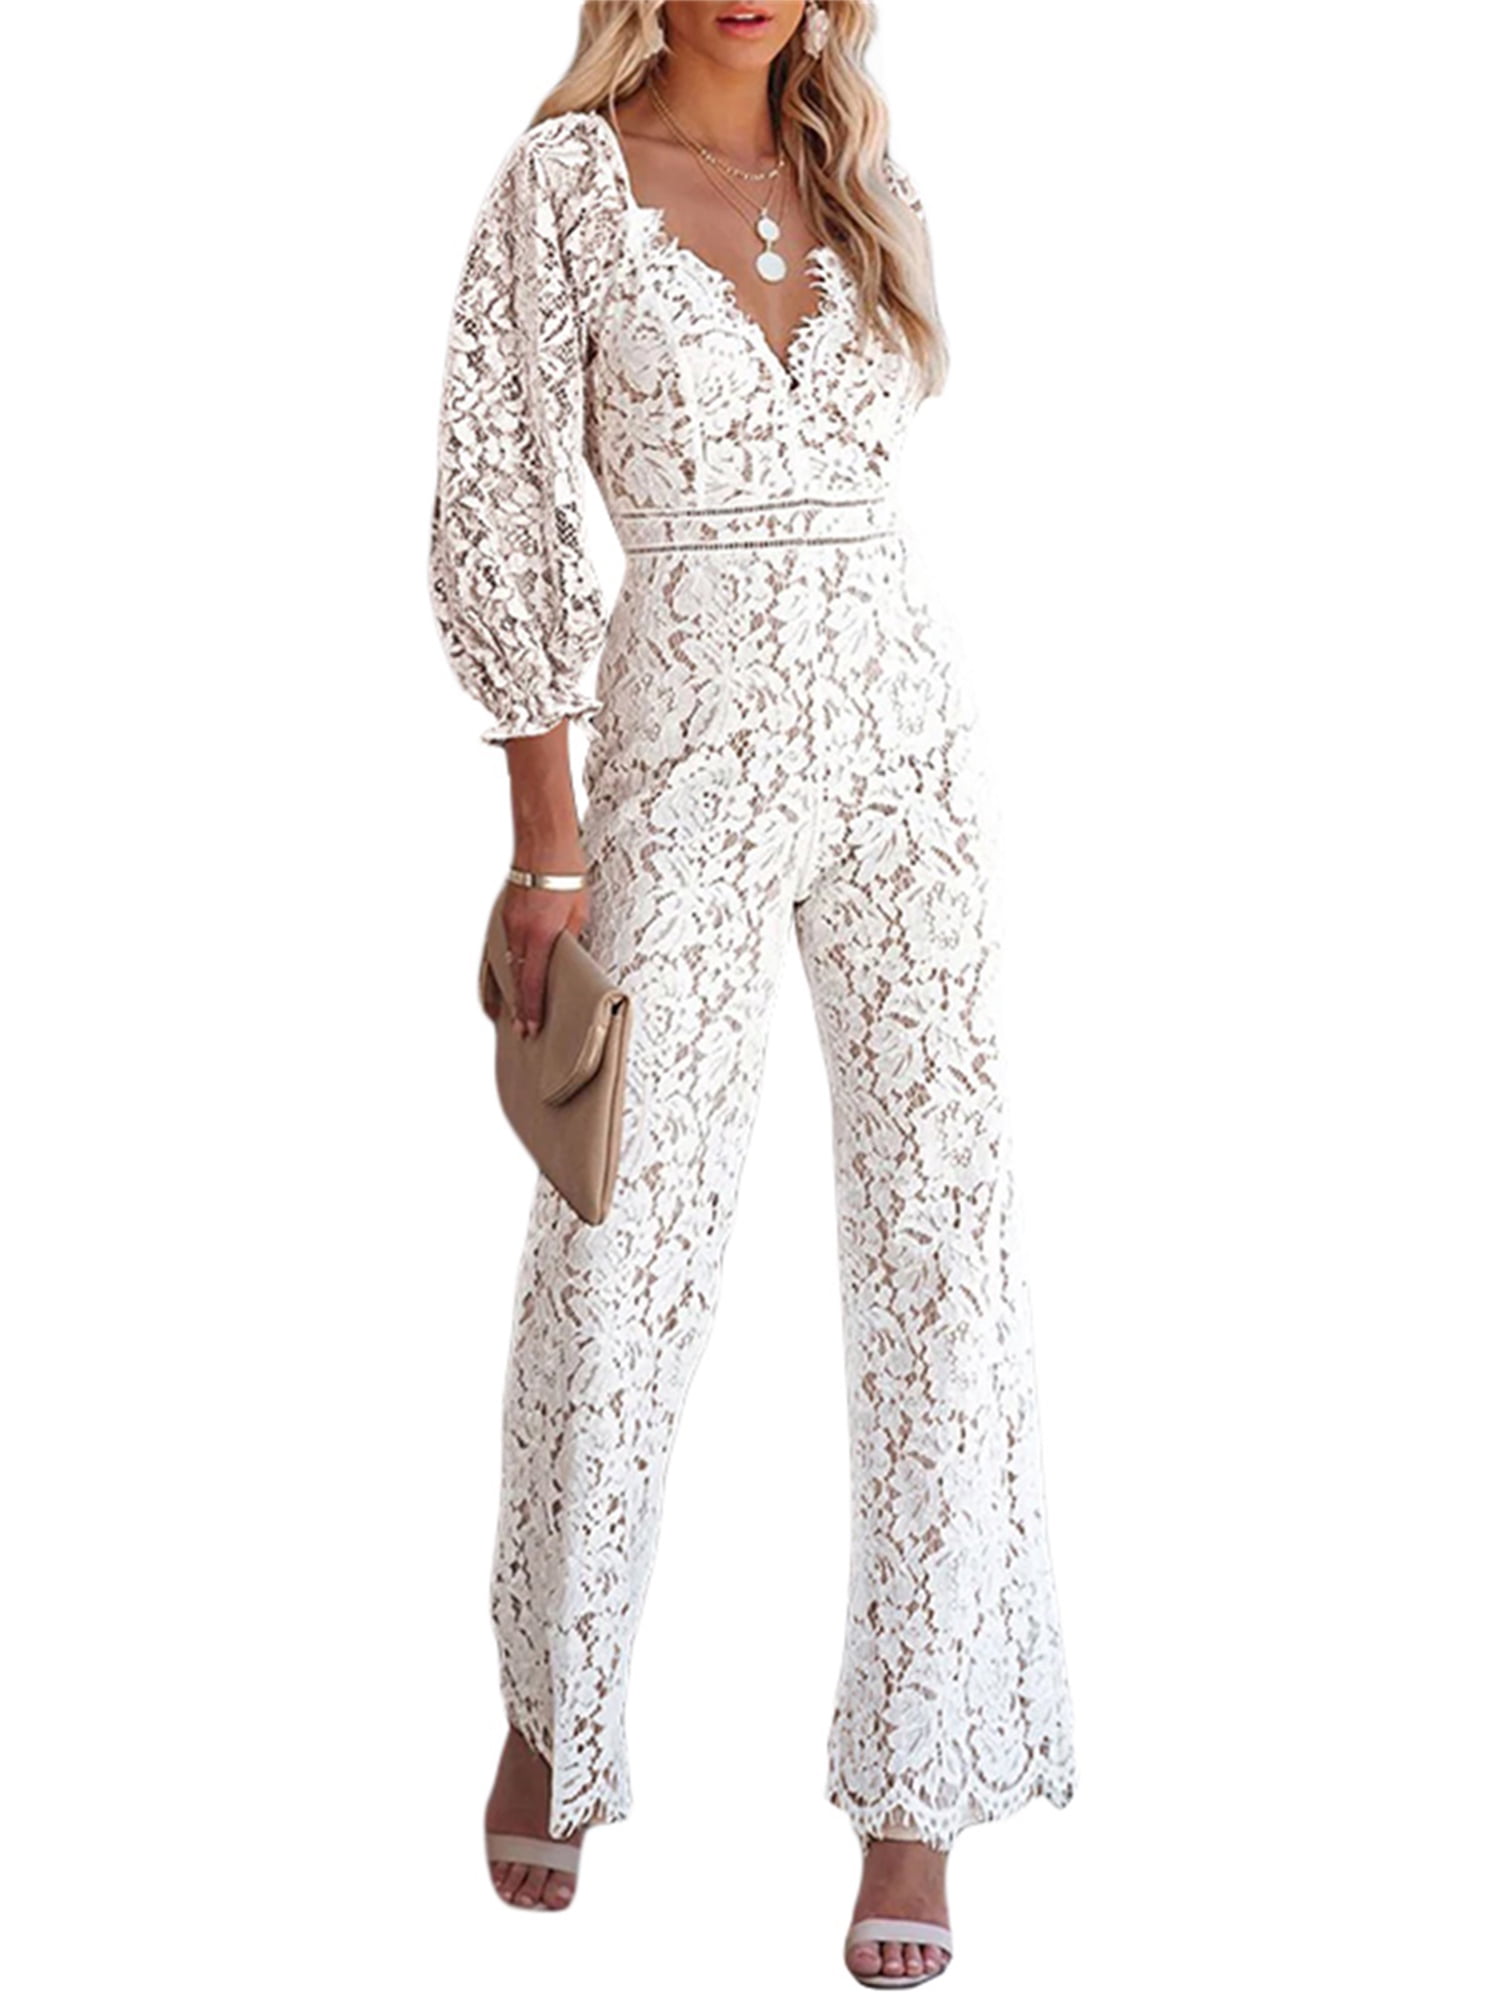 JYYYBF Womens One Piece Jumpsuit Long Sleeve V Neck Floral Lace Romper Elegant Party Streetwear White M -